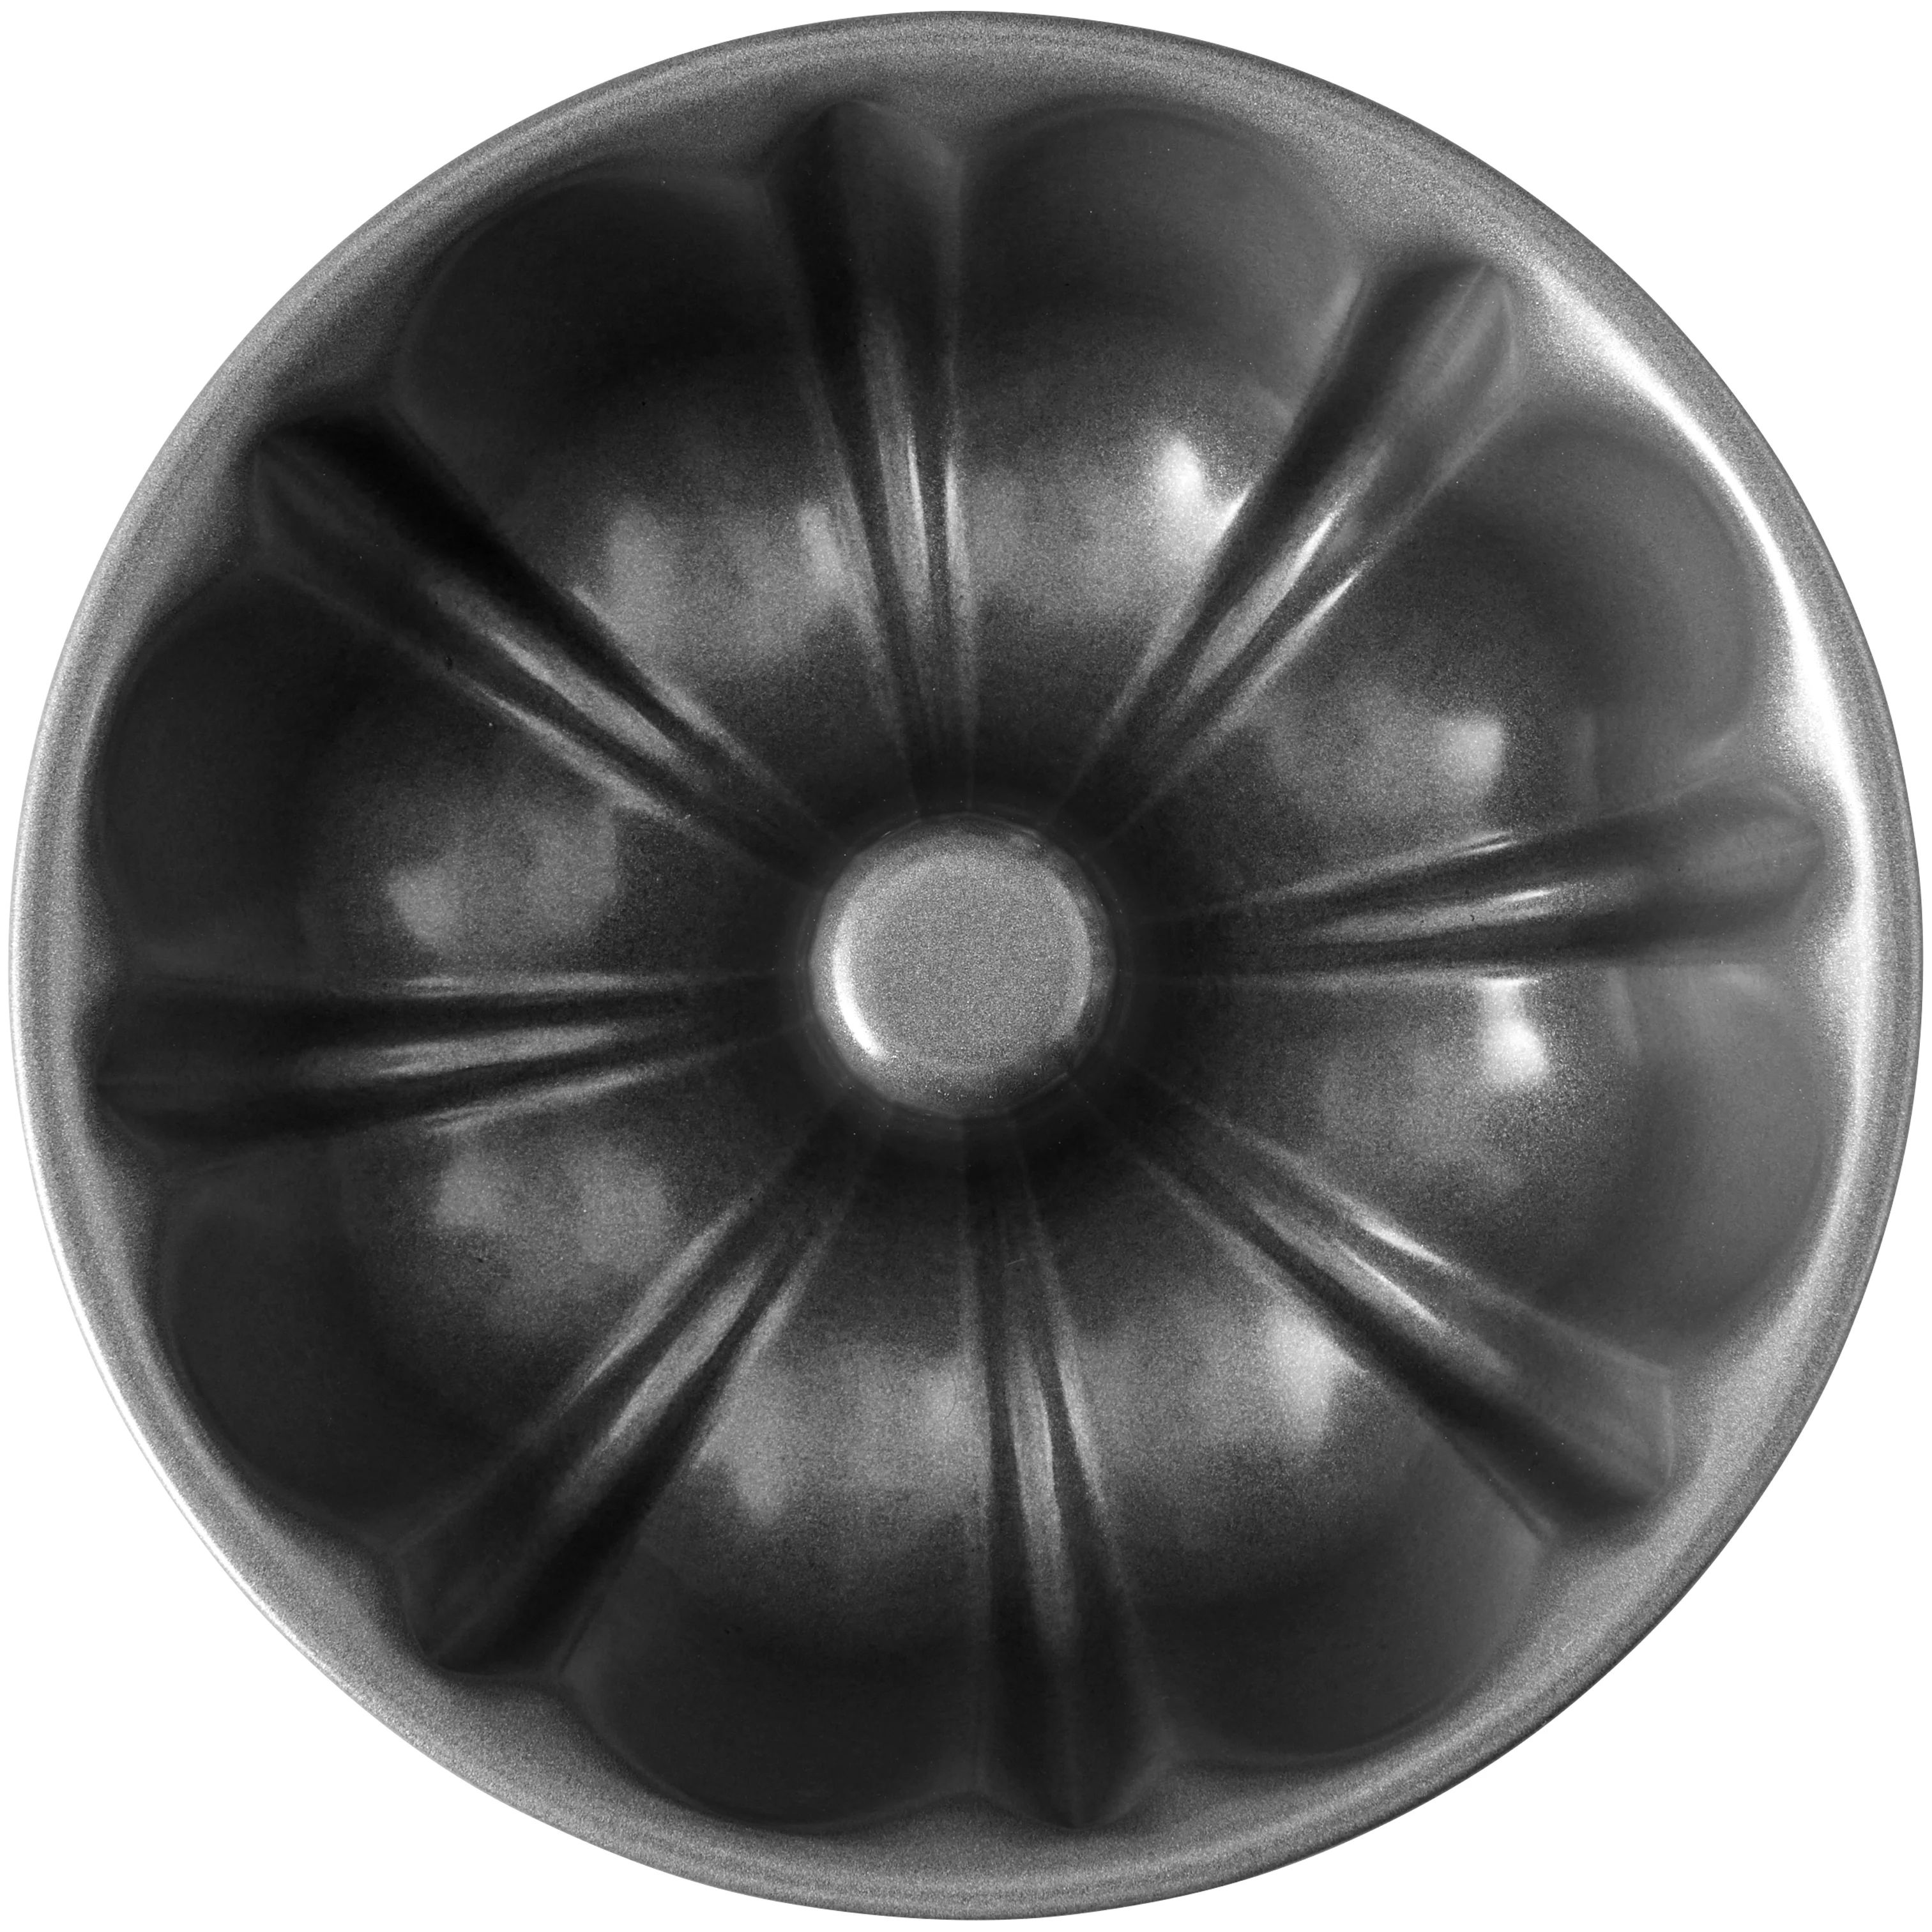 Wilton Treats Made Simple Non-Stick Fluted Tube Pan, 6 Inch | Walmart (US)